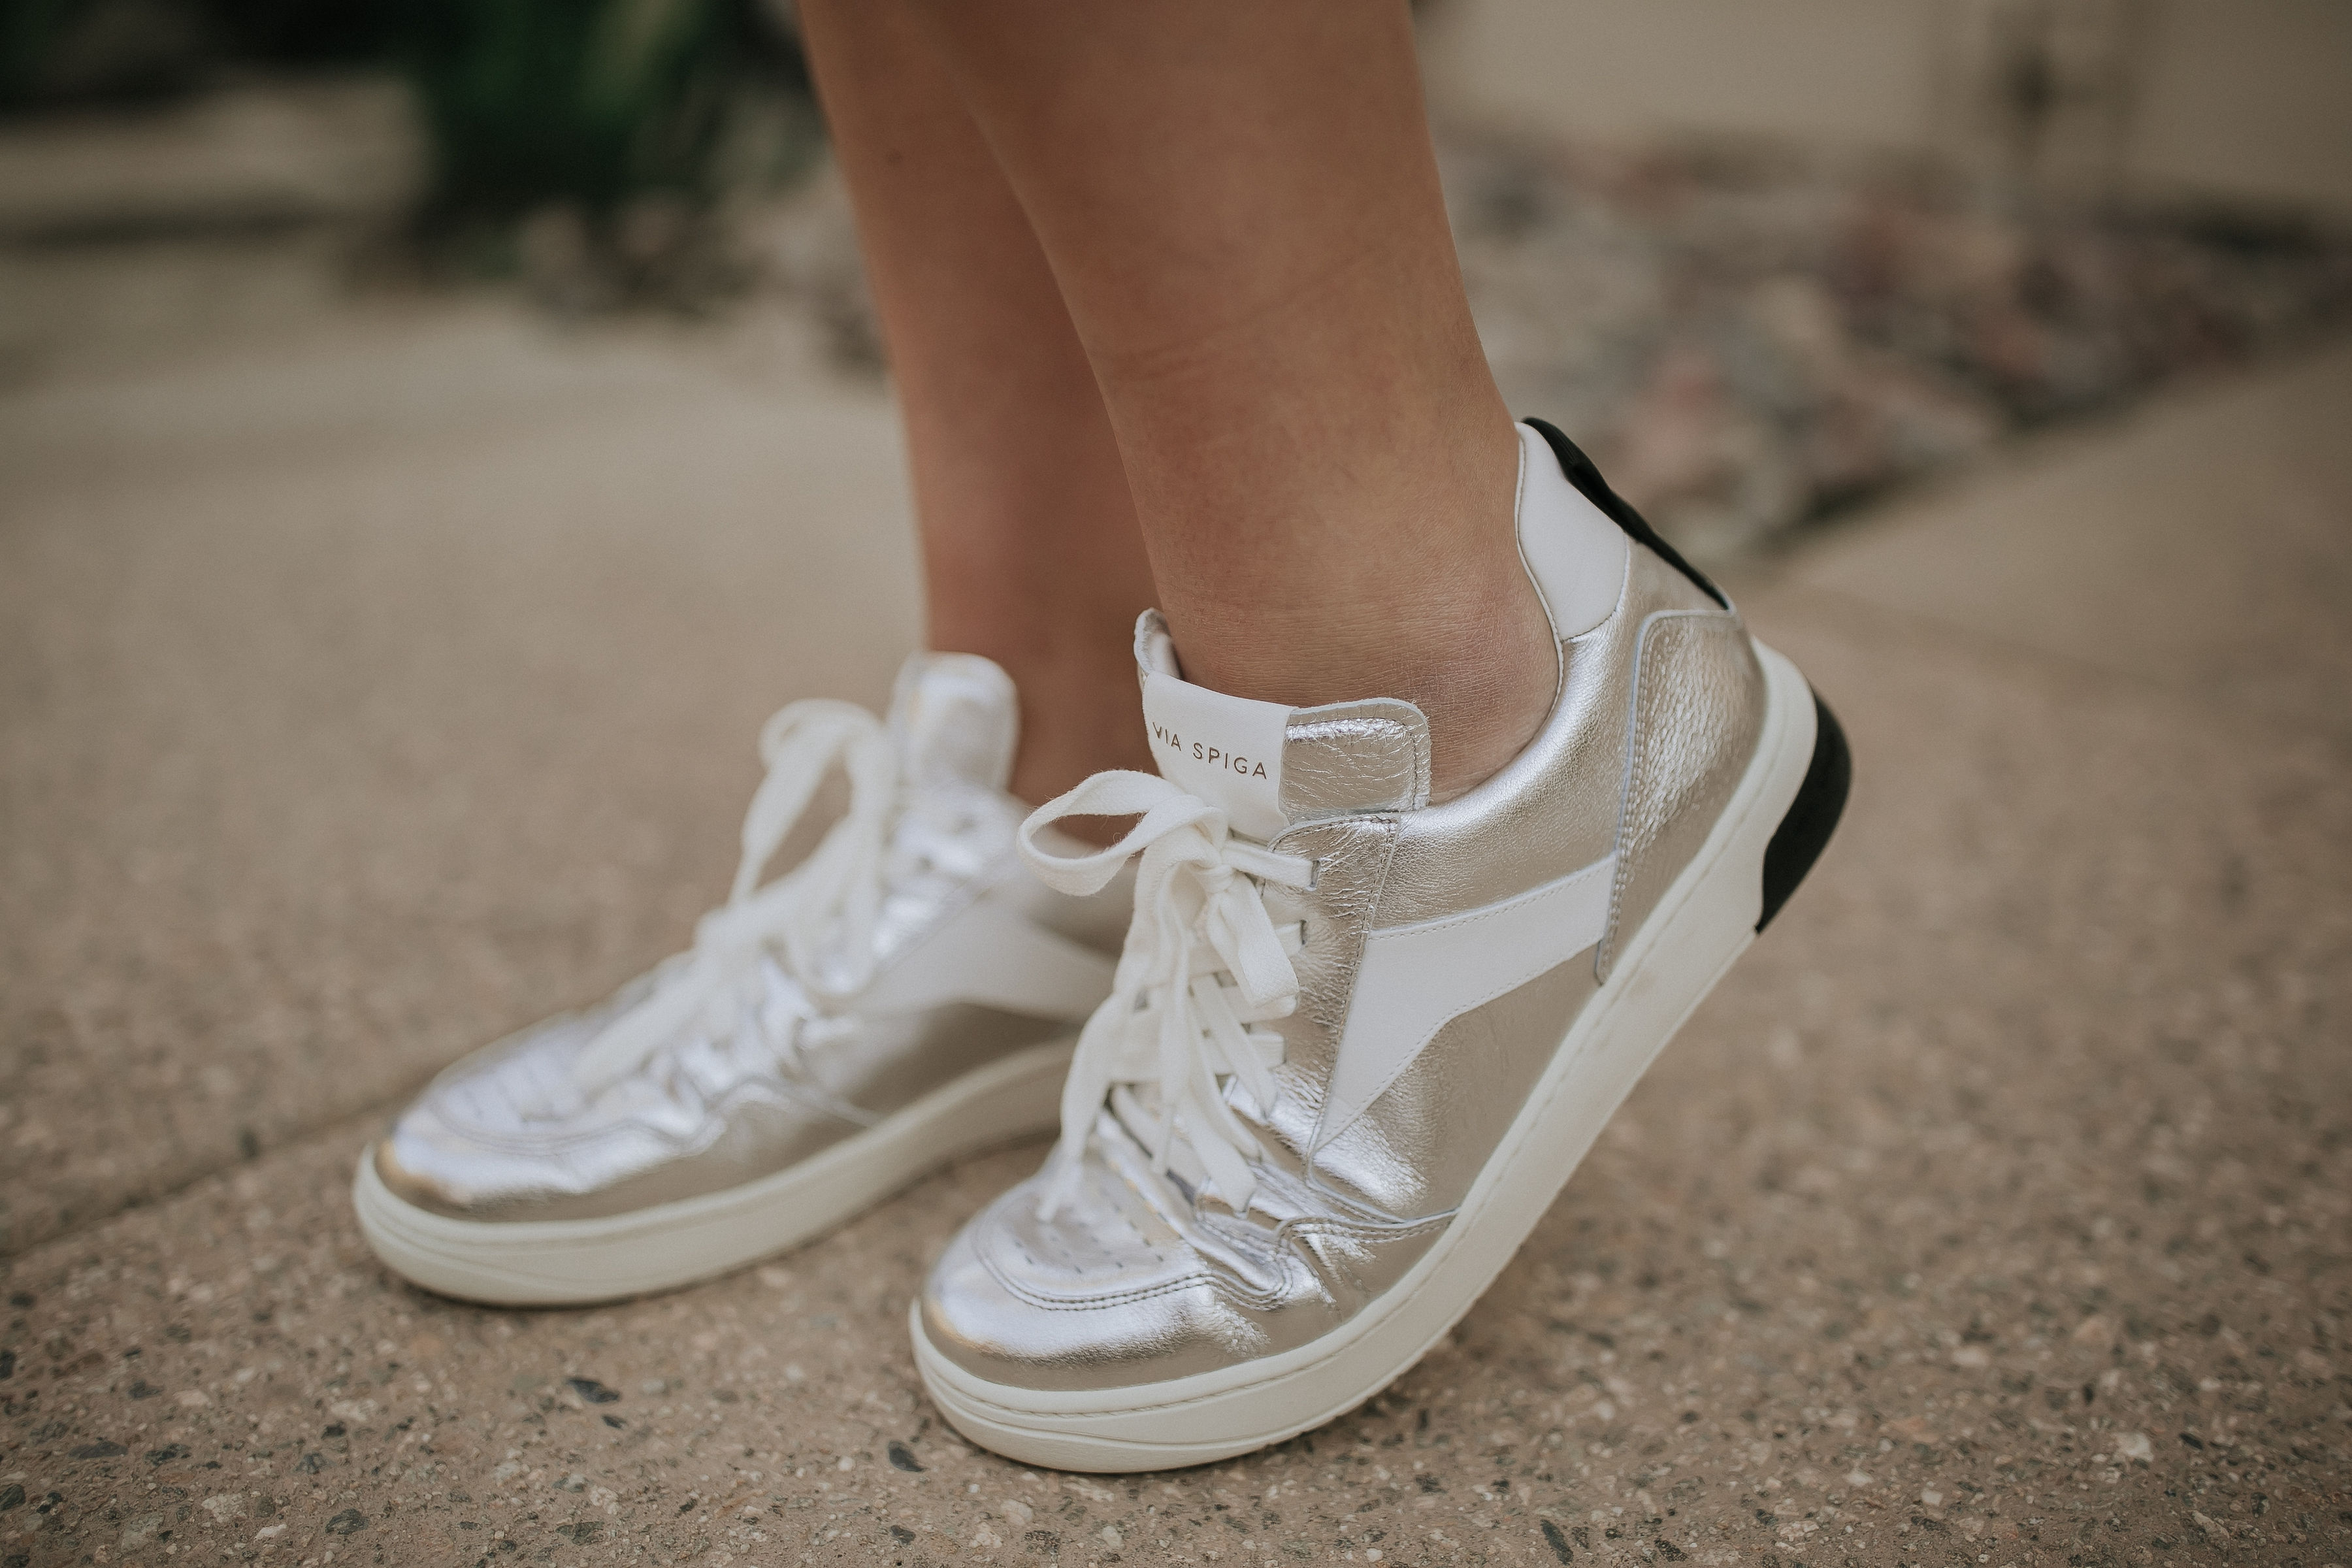 San Francisco Blogger, Ashley Zeal, from Two Peas in a Prada shares the best metallic sneakers for spring: the Lowrie by Via Spiga.